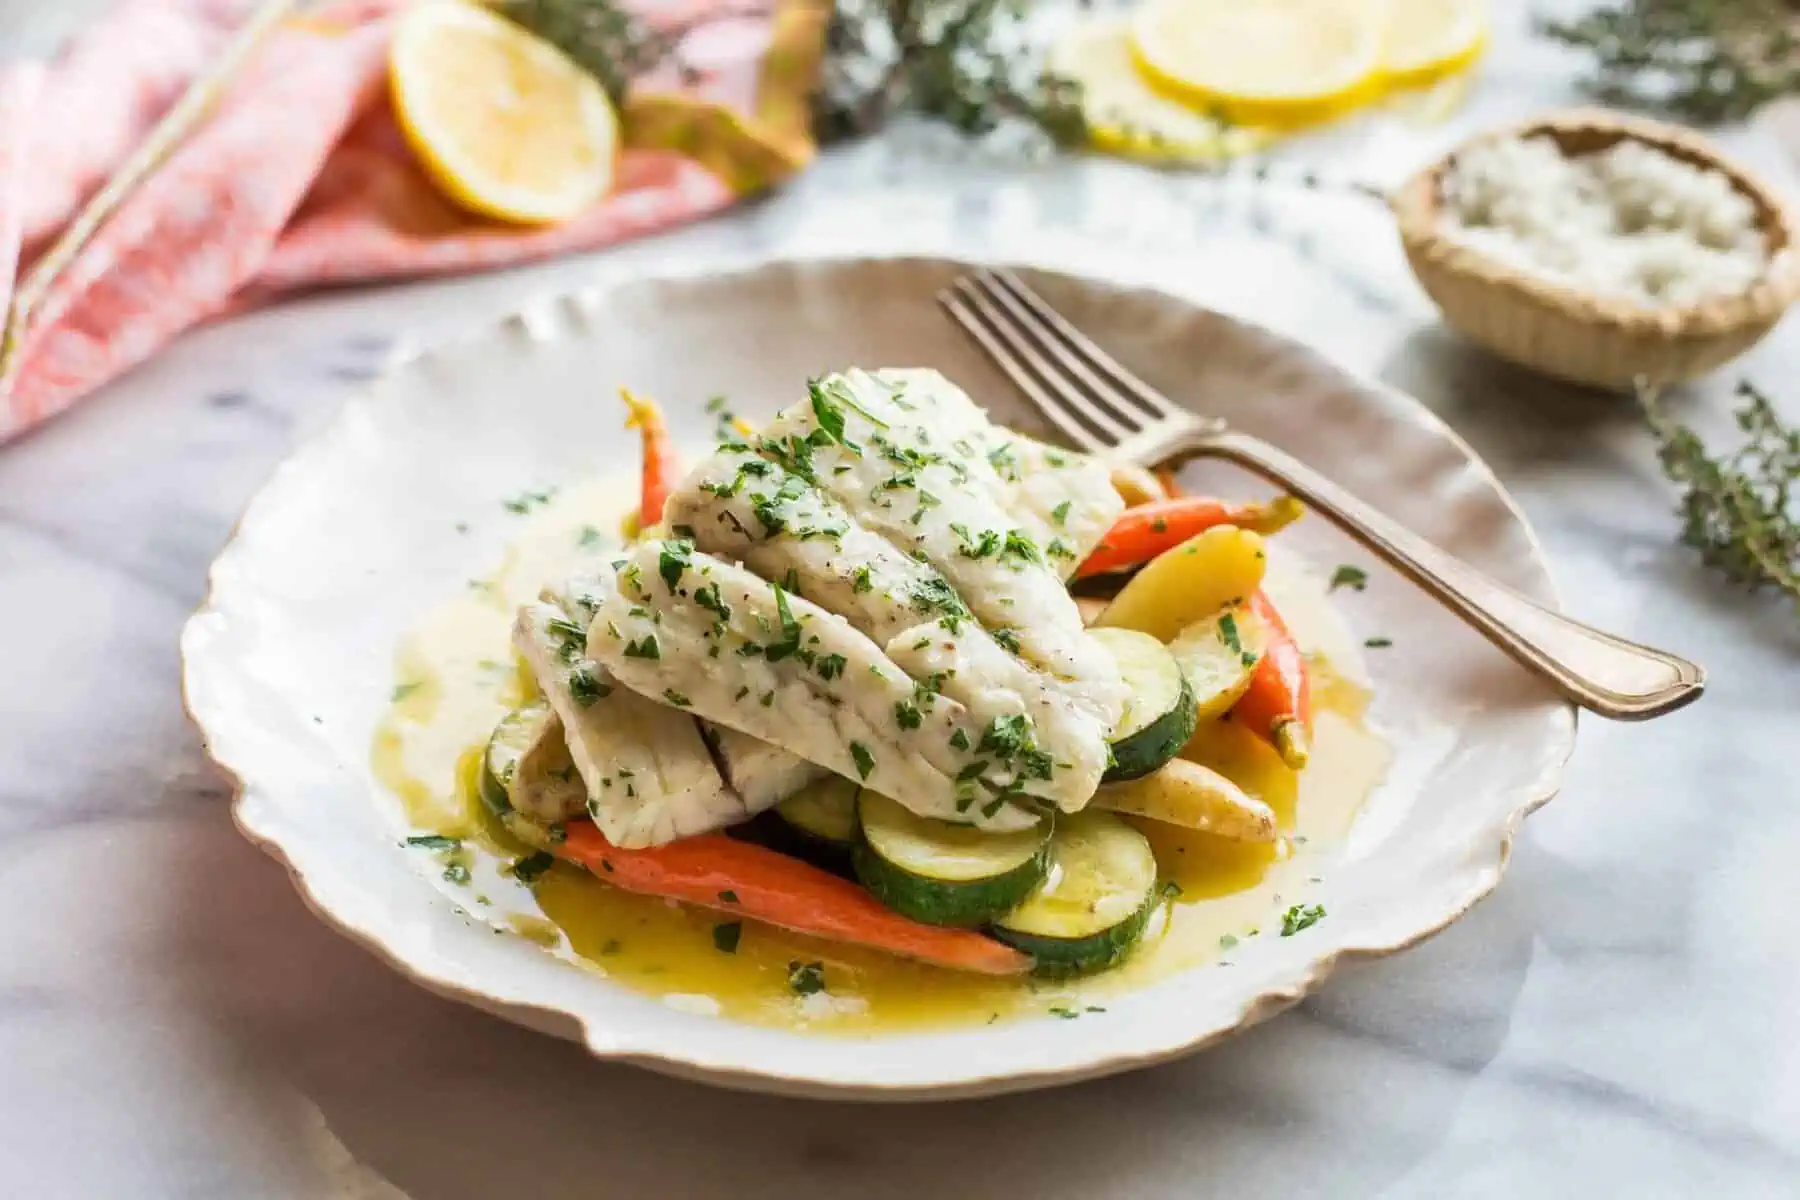 Butter poached fish fillets layered over vegetables in a shallow bowl.